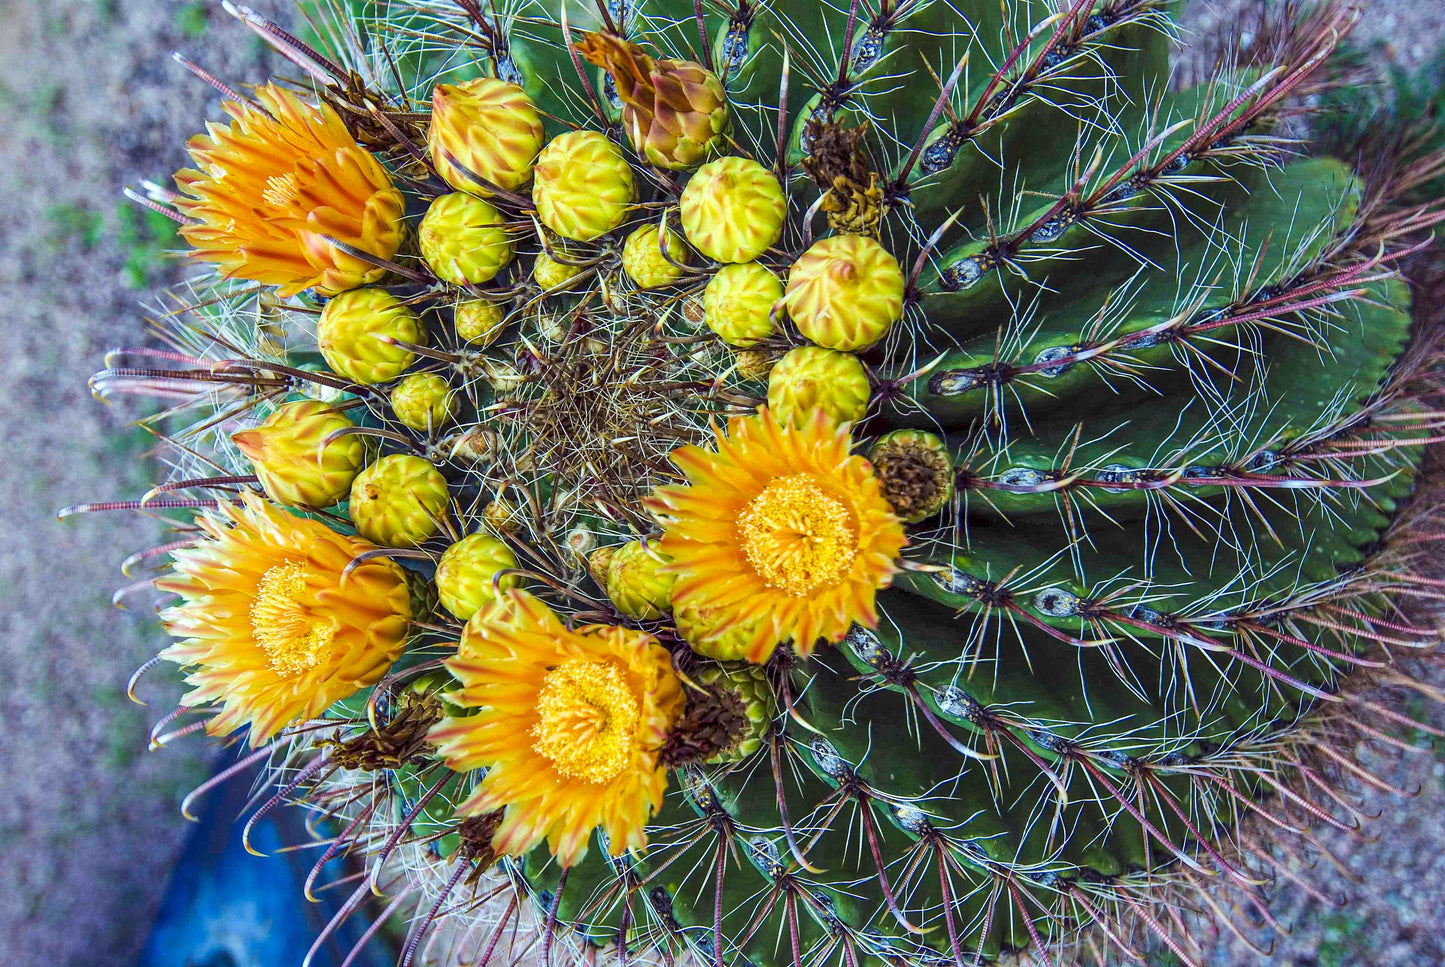 Alessandra Mattanza | BLOSSOM’S SPELL, Tucson, Arizona, USA. A cactus blooms in the Arizona desert. Available as an art print or as a photographic print on acrylic glass.